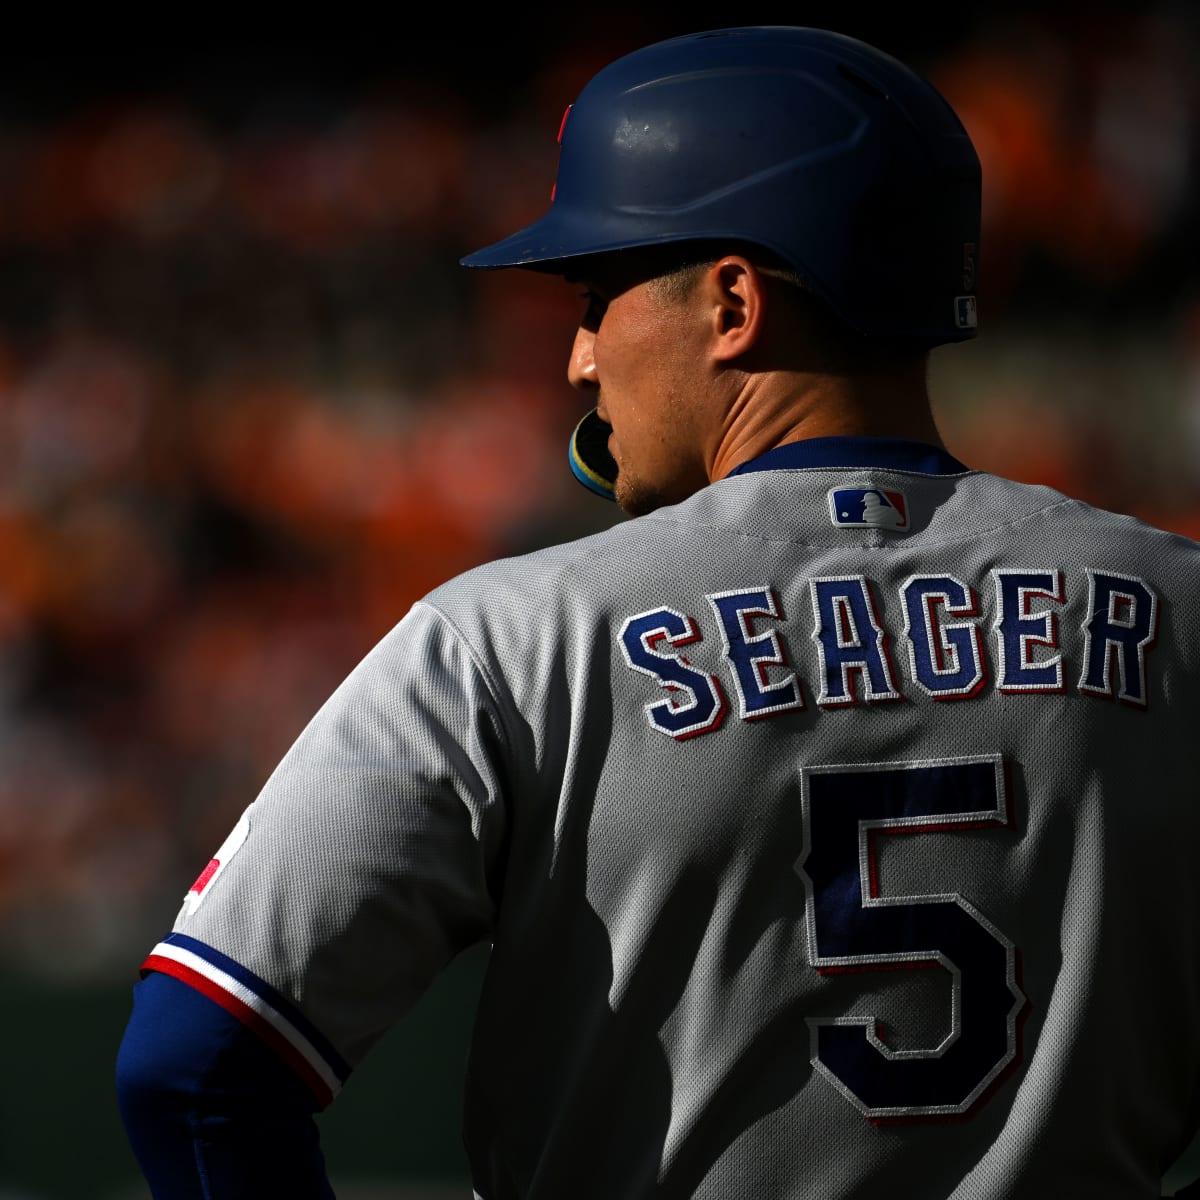 What MLB record did Corey Seager set on Tuesday?